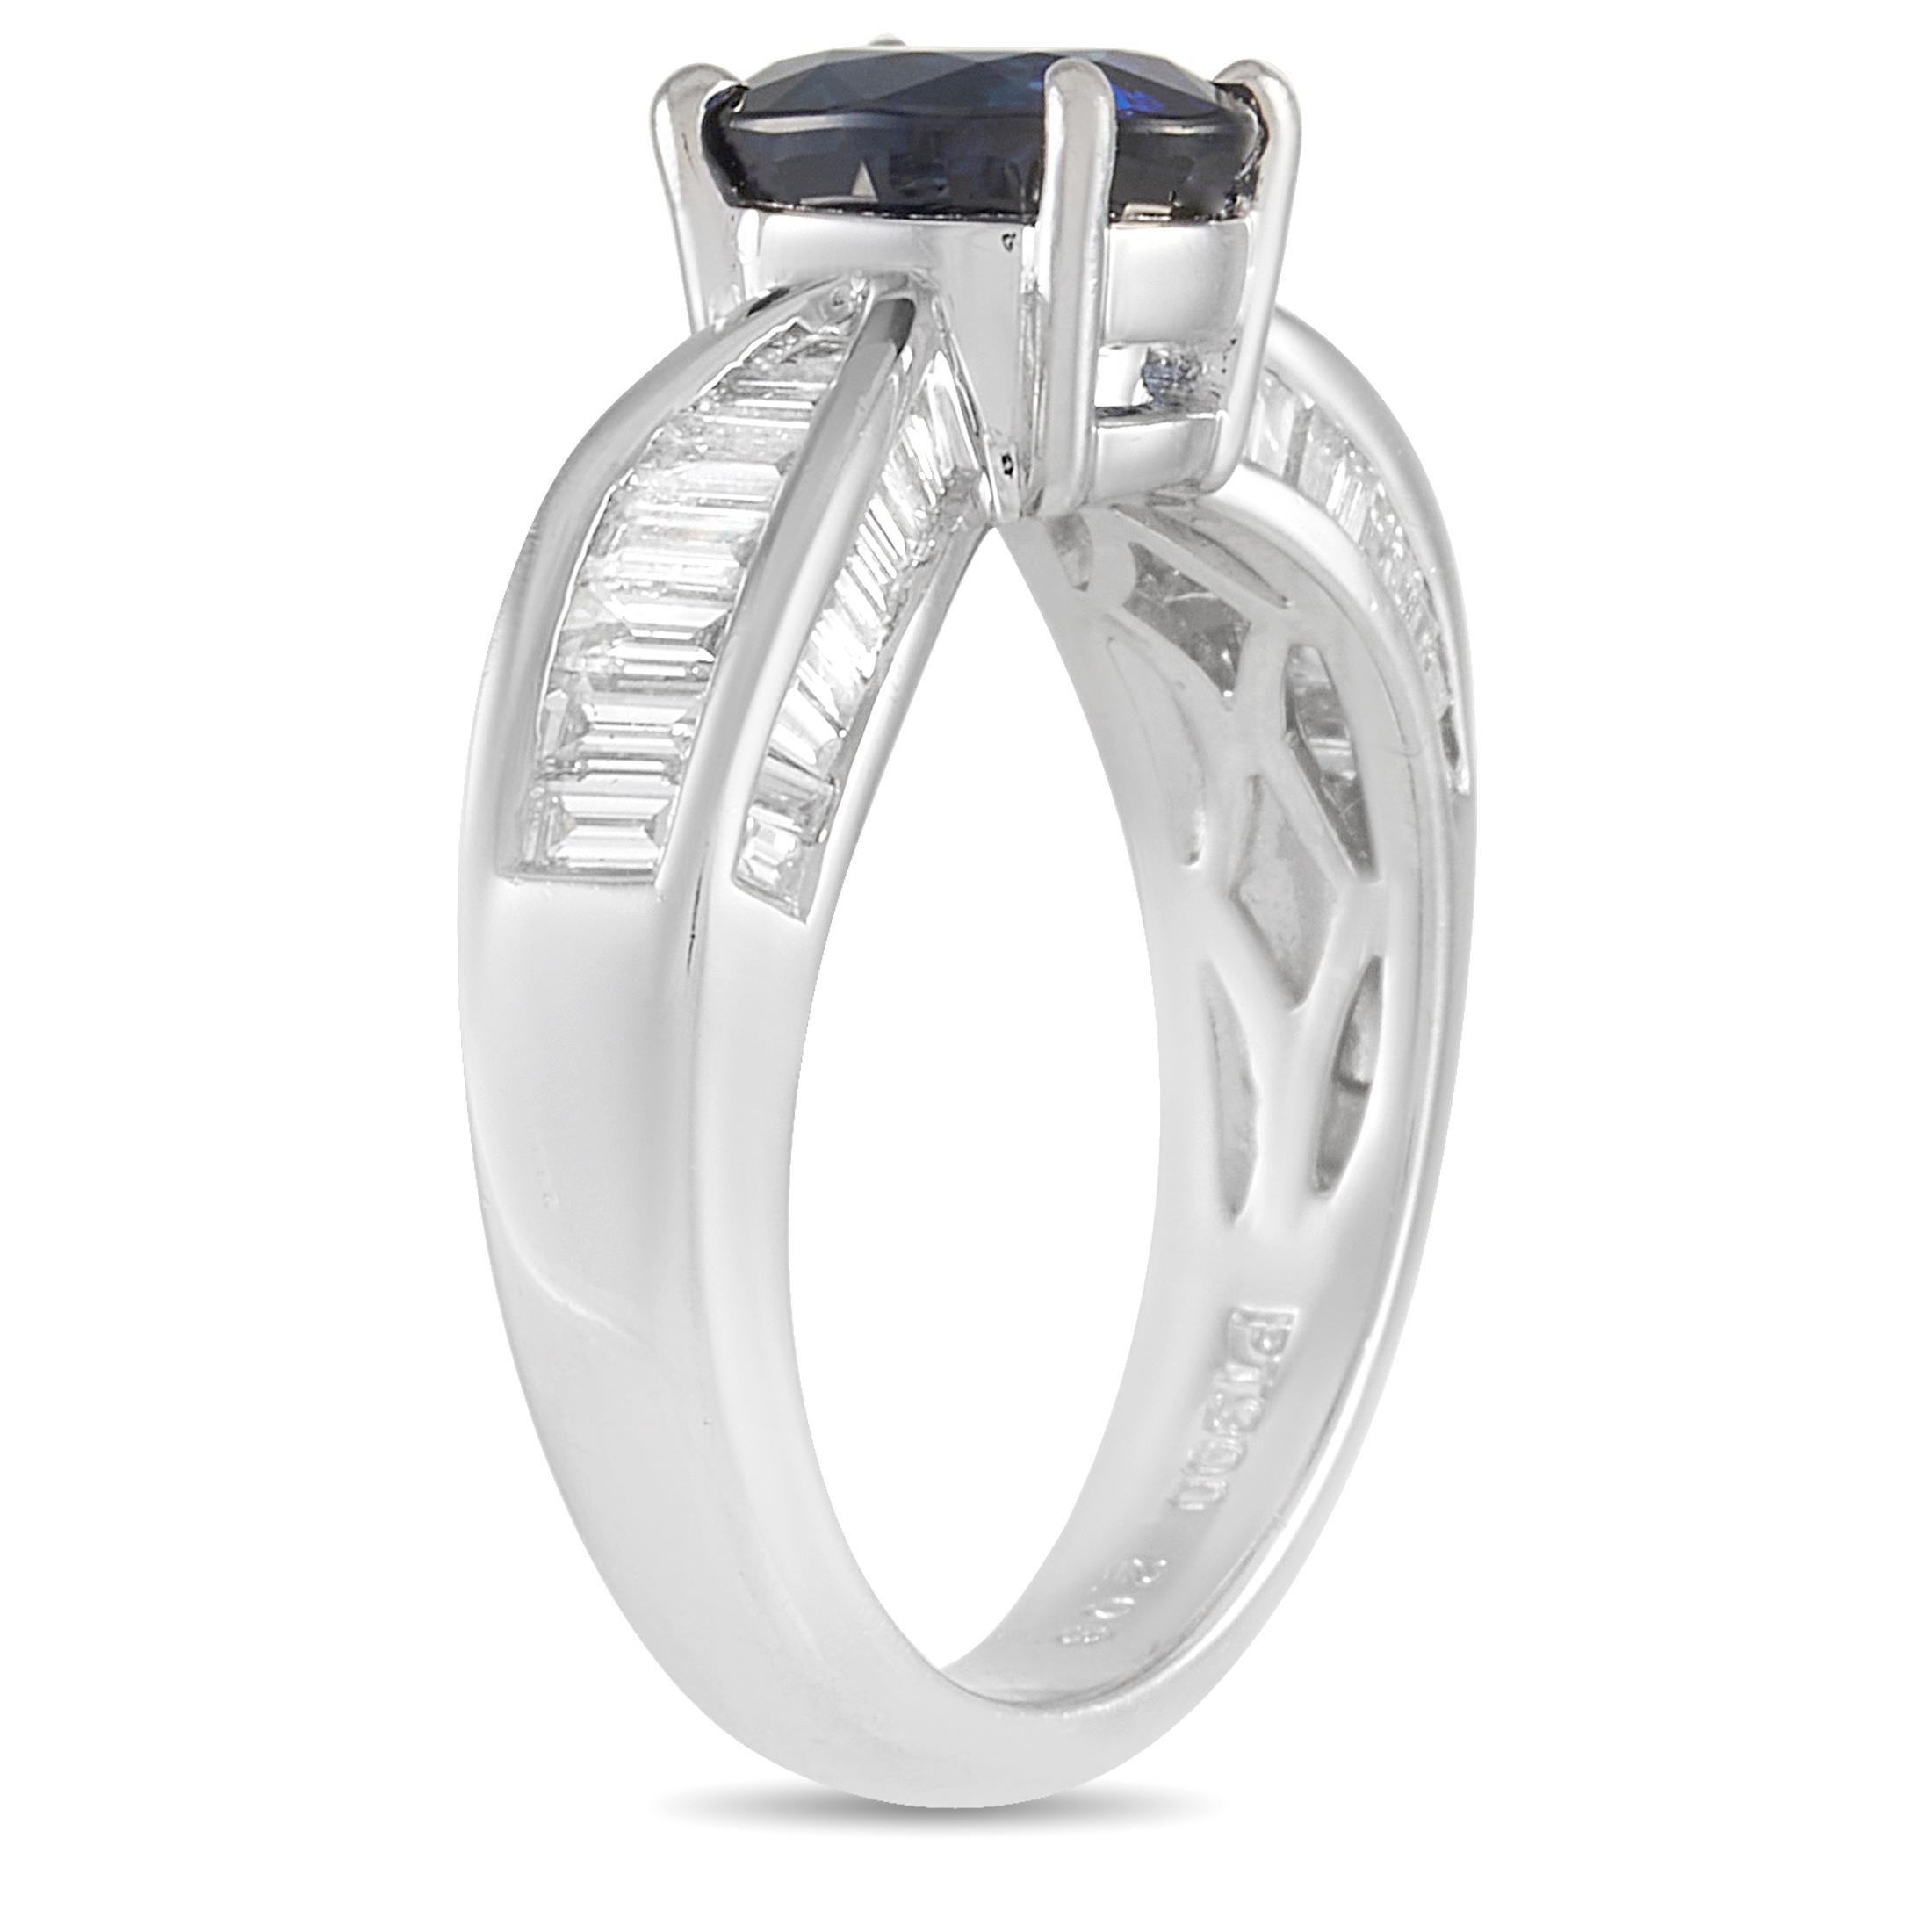 Sleek and sophisticated, this luxury ring features a Platinum band that comes to life thanks to inset step-cut diamonds totaling 0.73 carats. A deep blue oval-cut 2.03 carat sapphire center stone adds a touch of color to this elegant, understated